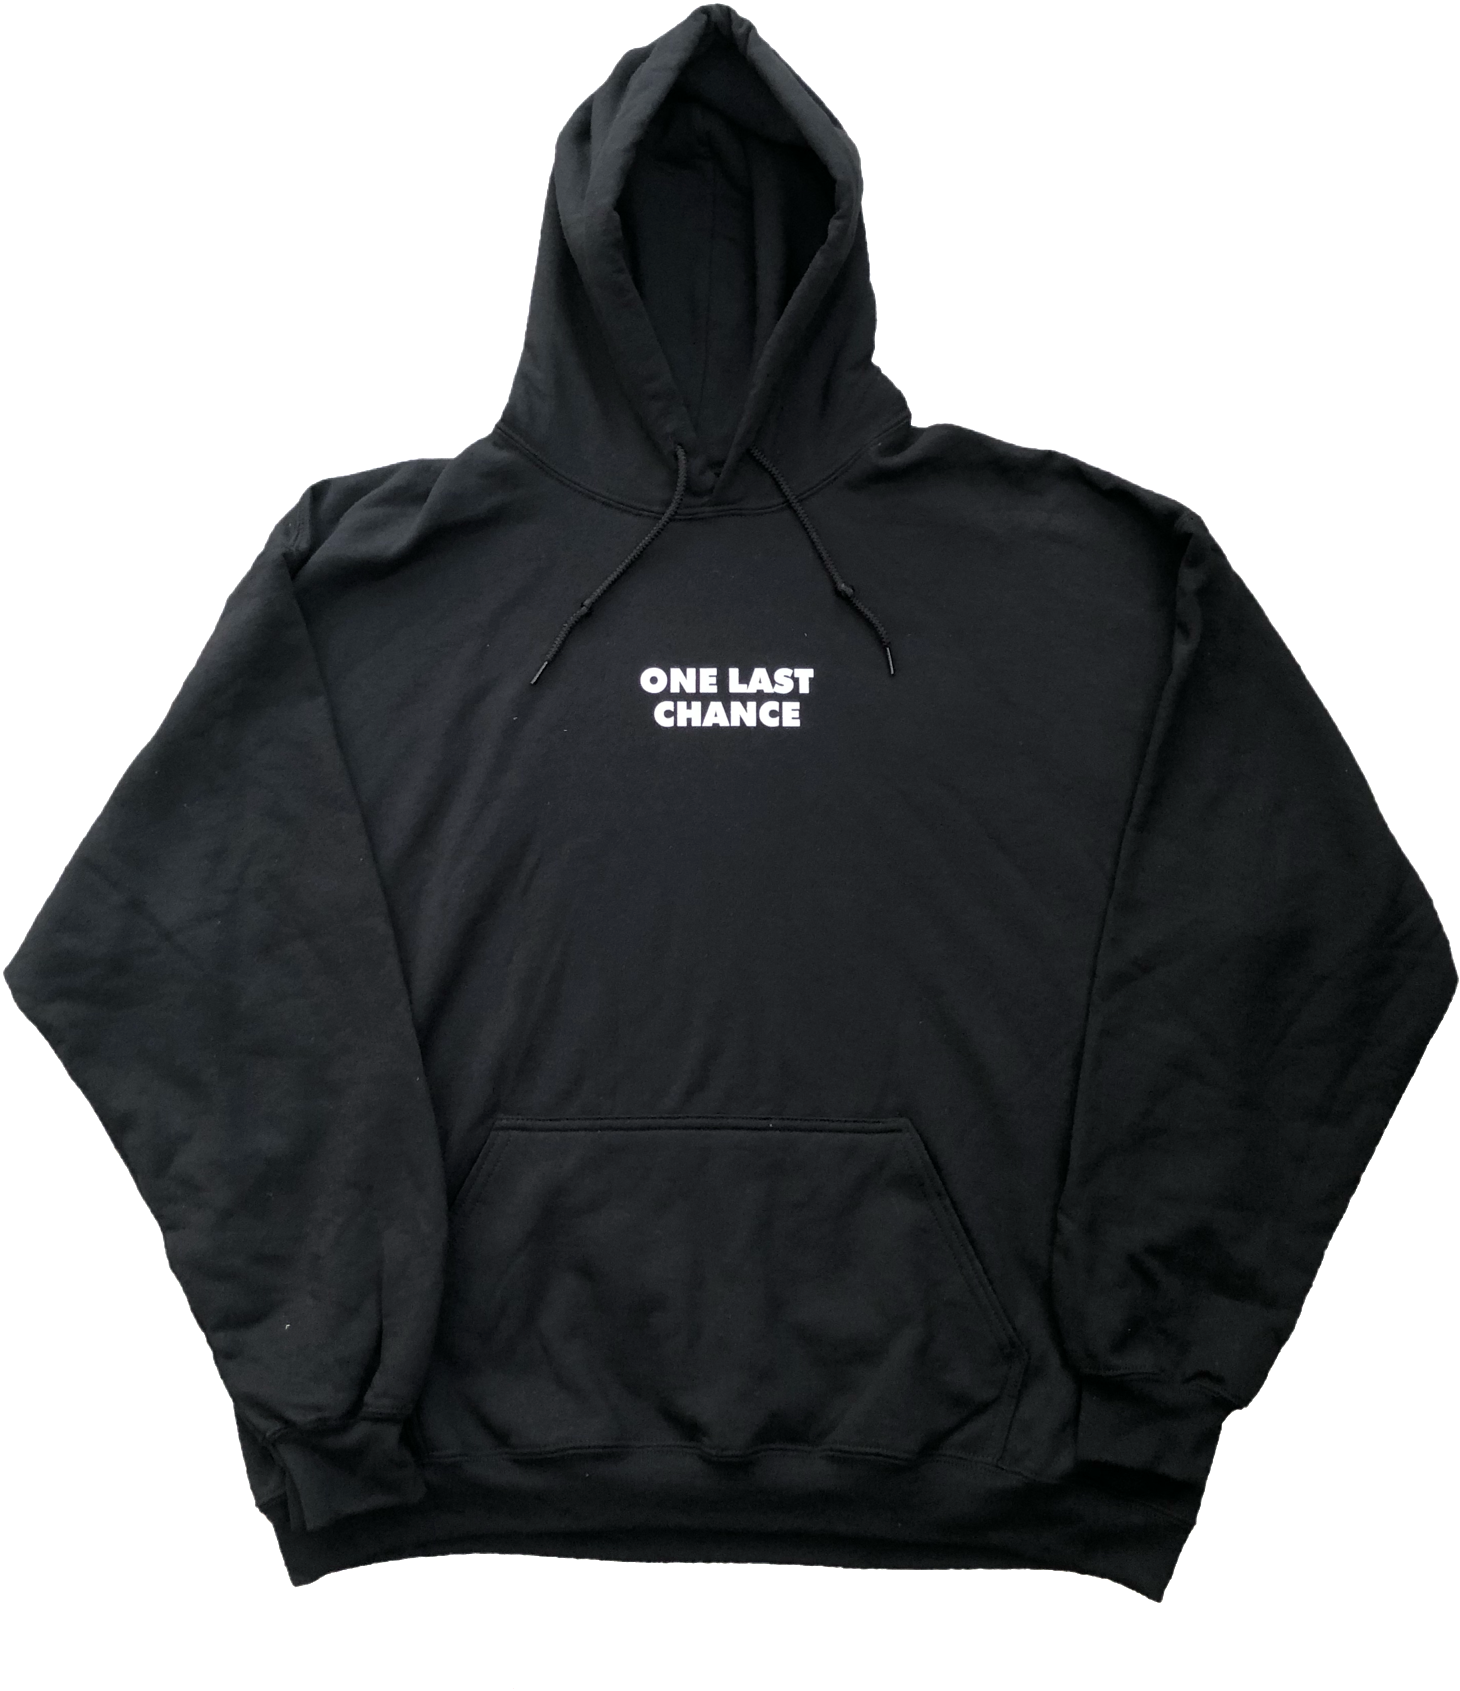 Download One Last Chance Hoodie - 慶應 パーカー PNG Image with No Background ...